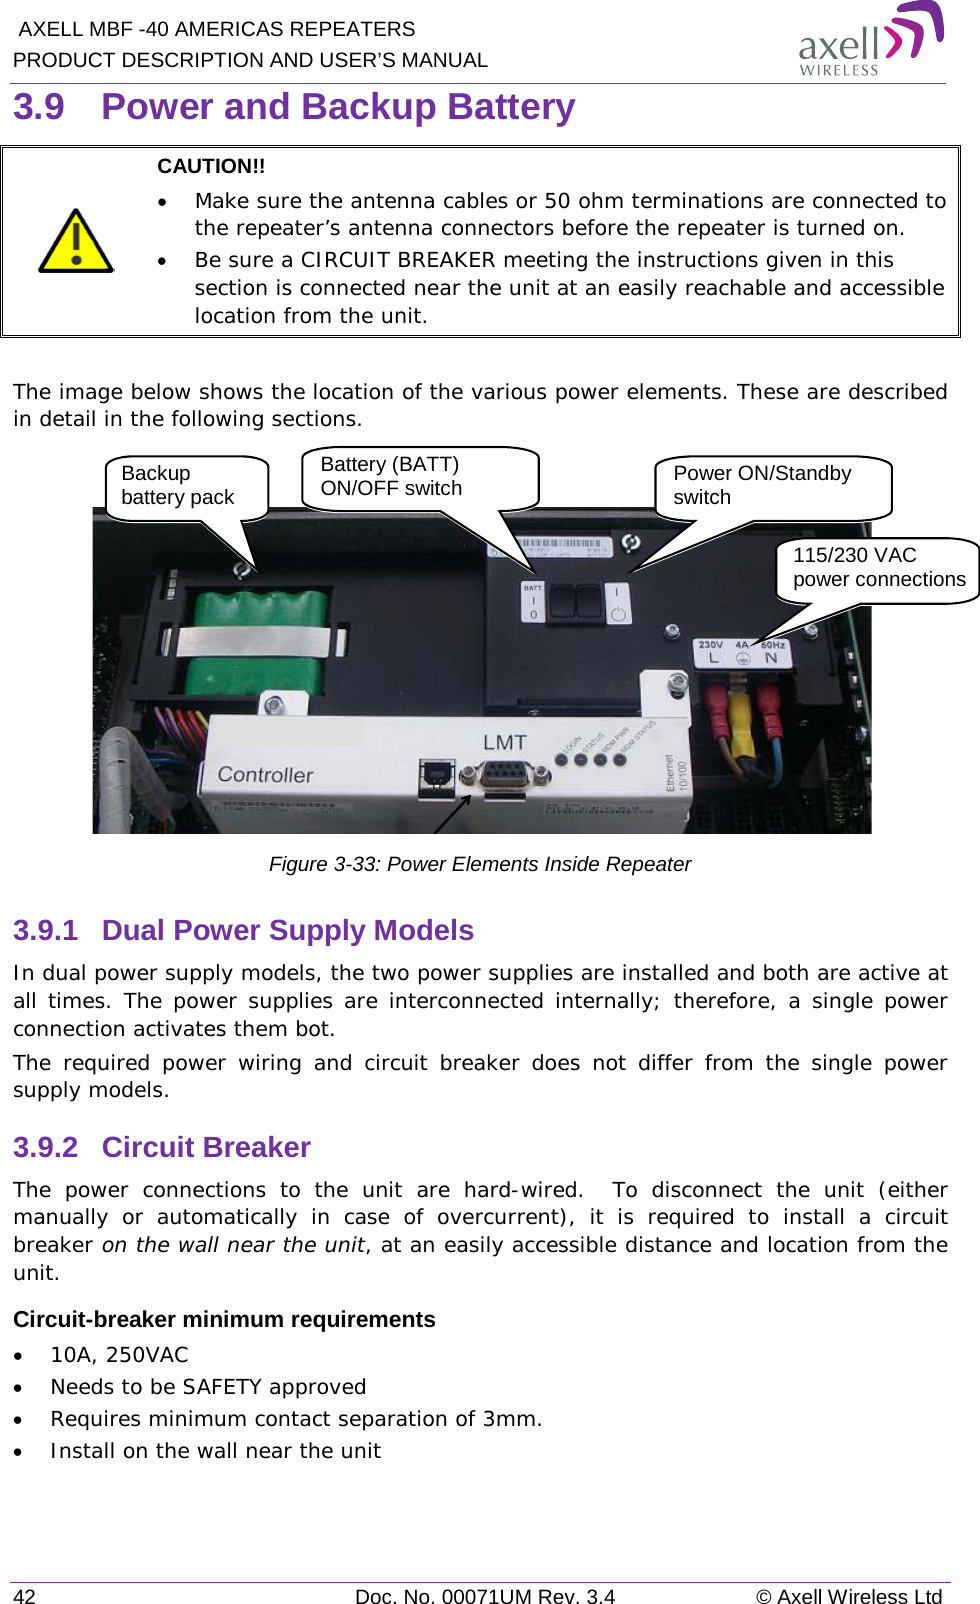  AXELL MBF -40 AMERICAS REPEATERS PRODUCT DESCRIPTION AND USER’S MANUAL 42 Doc. No. 00071UM Rev. 3.4 © Axell Wireless Ltd 3.9  Power and Backup Battery  CAUTION!!  • Make sure the antenna cables or 50 ohm terminations are connected to the repeater’s antenna connectors before the repeater is turned on.  • Be sure a CIRCUIT BREAKER meeting the instructions given in this section is connected near the unit at an easily reachable and accessible location from the unit.  The image below shows the location of the various power elements. These are described in detail in the following sections.   Figure  3-33: Power Elements Inside Repeater 3.9.1  Dual Power Supply Models In dual power supply models, the two power supplies are installed and both are active at all times. The power supplies are interconnected internally; therefore, a single power connection activates them bot.   The required power wiring and circuit breaker does not differ from the single power supply models. 3.9.2  Circuit Breaker The power connections to the unit are hard-wired.  To disconnect the unit (either manually or automatically in case of overcurrent), it is required to install a circuit breaker on the wall near the unit, at an easily accessible distance and location from the unit. Circuit-breaker minimum requirements • 10A, 250VAC • Needs to be SAFETY approved • Requires minimum contact separation of 3mm. • Install on the wall near the unit     115/230 VAC power connections Power ON/Standby switch Backup battery pack  Battery (BATT) ON/OFF switch 